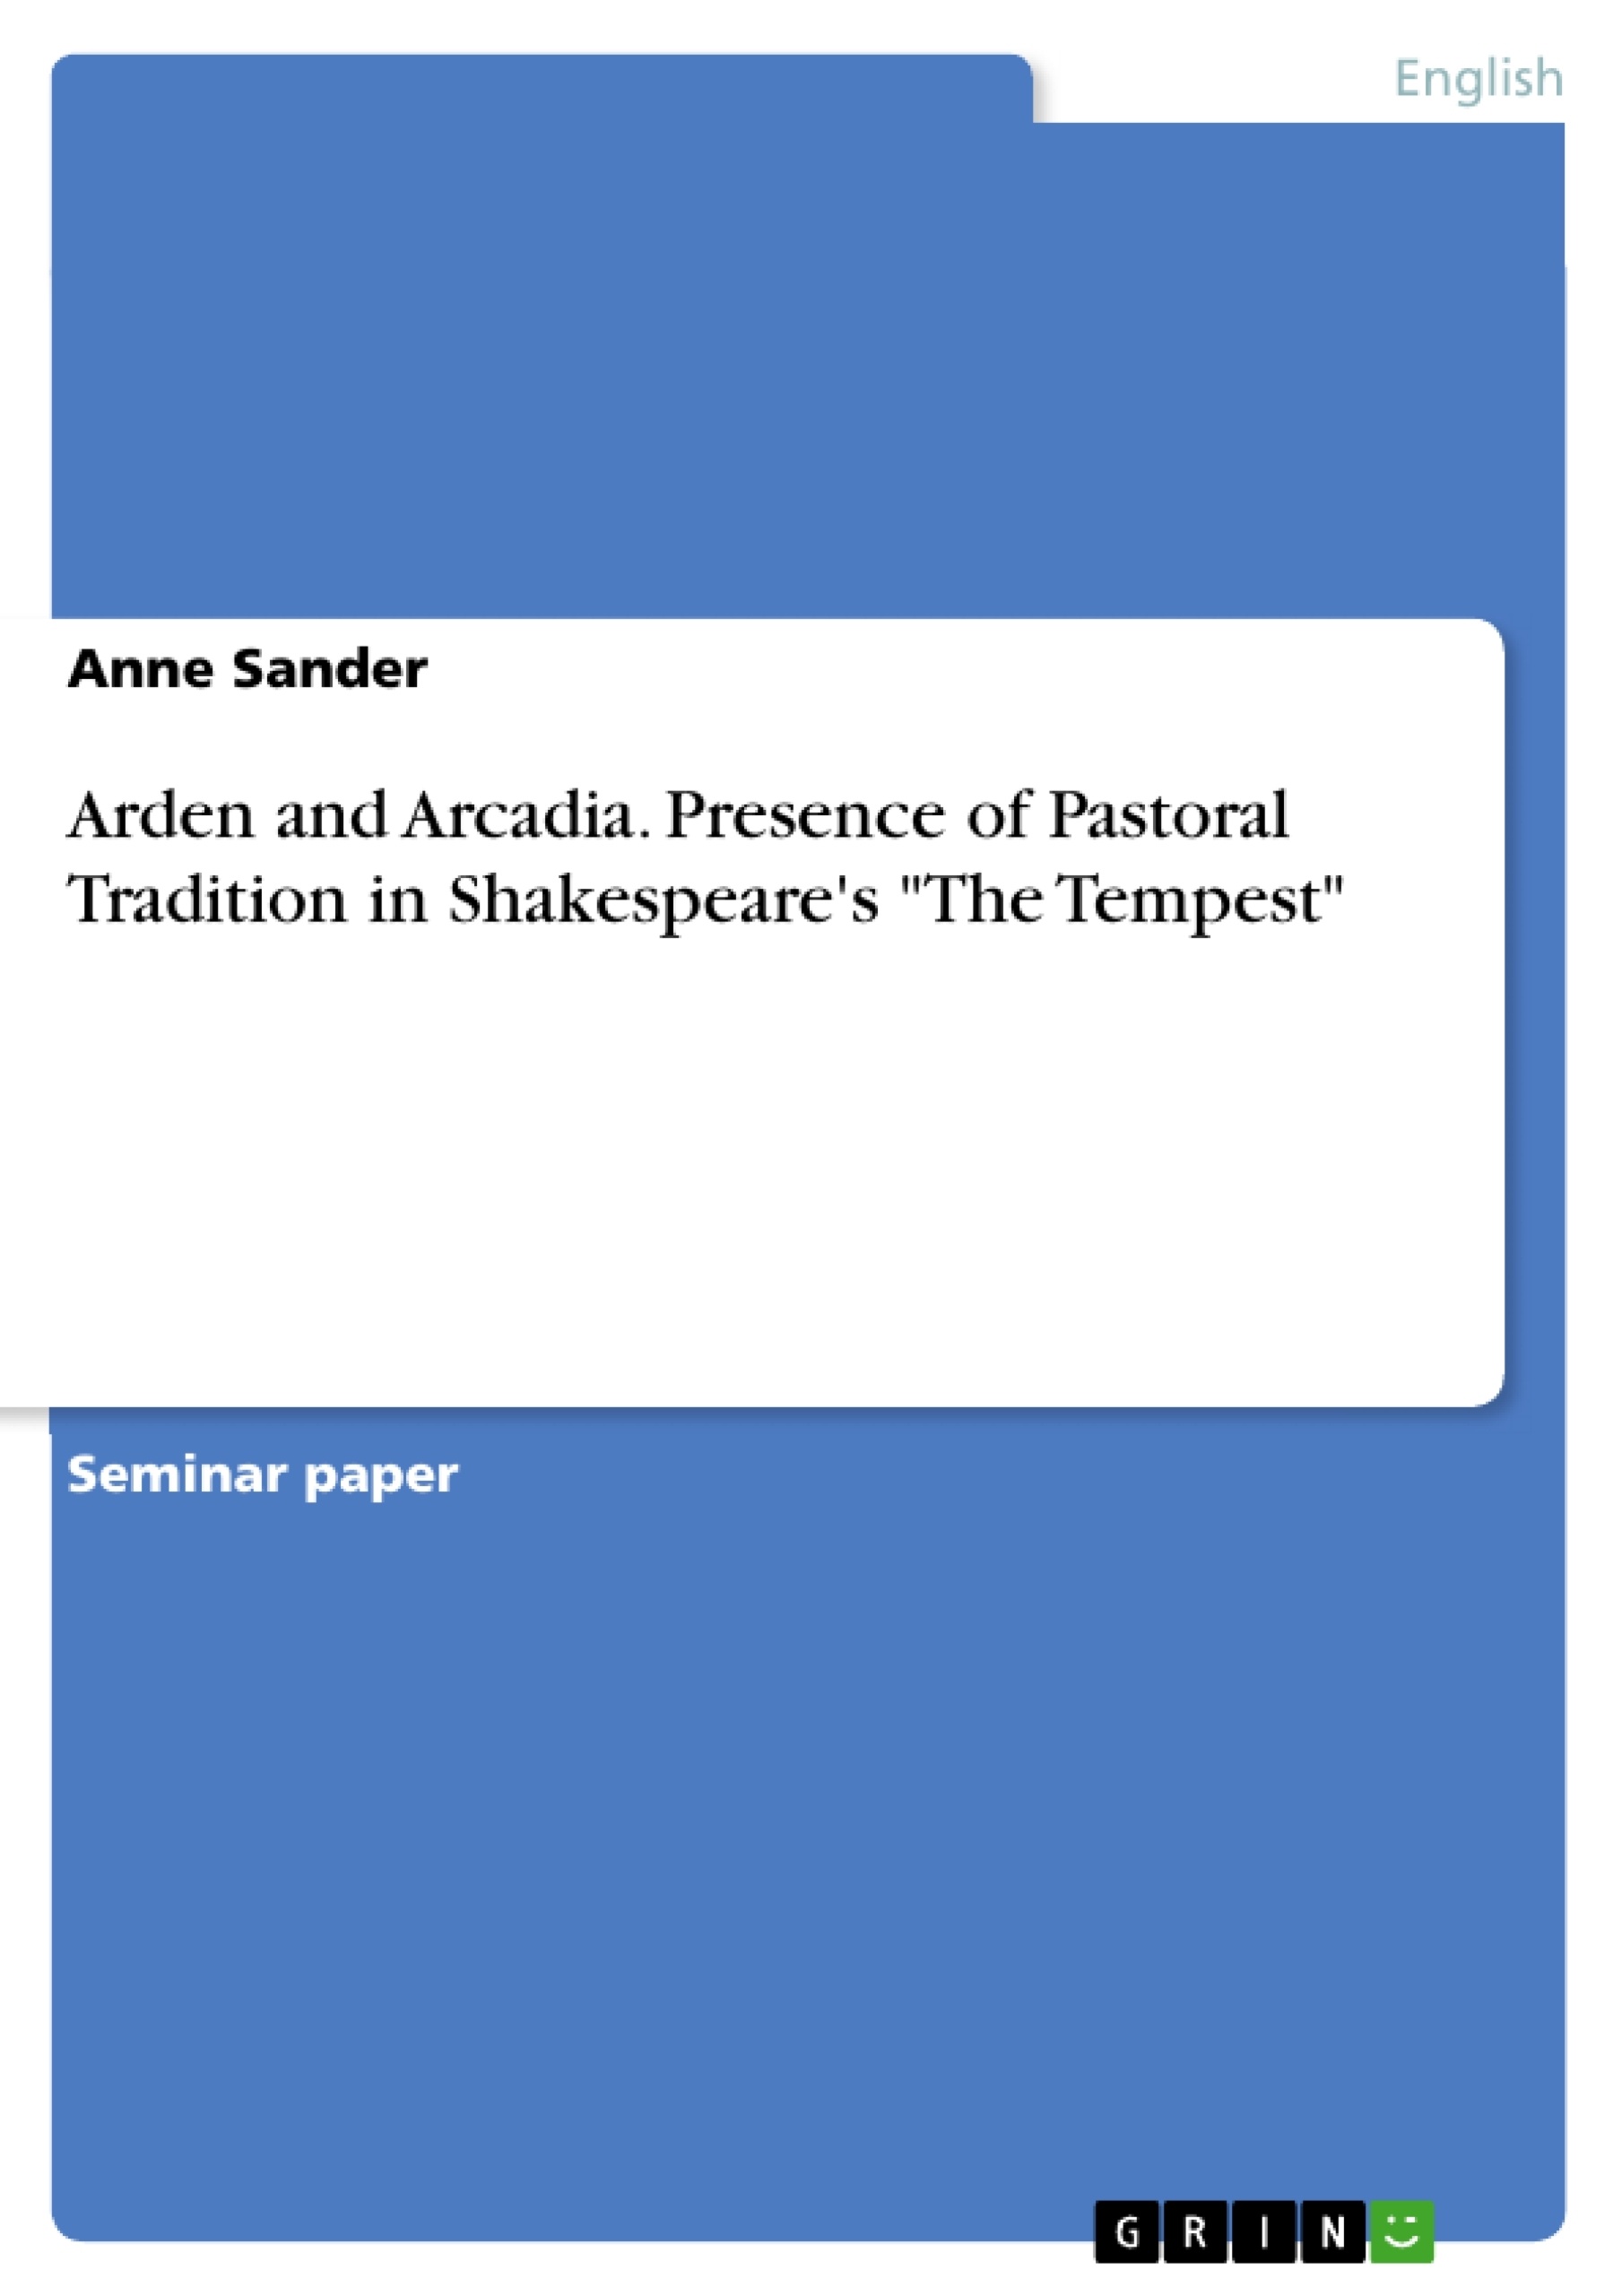 Título: Arden and Arcadia. Presence of Pastoral Tradition in Shakespeare's "The Tempest"